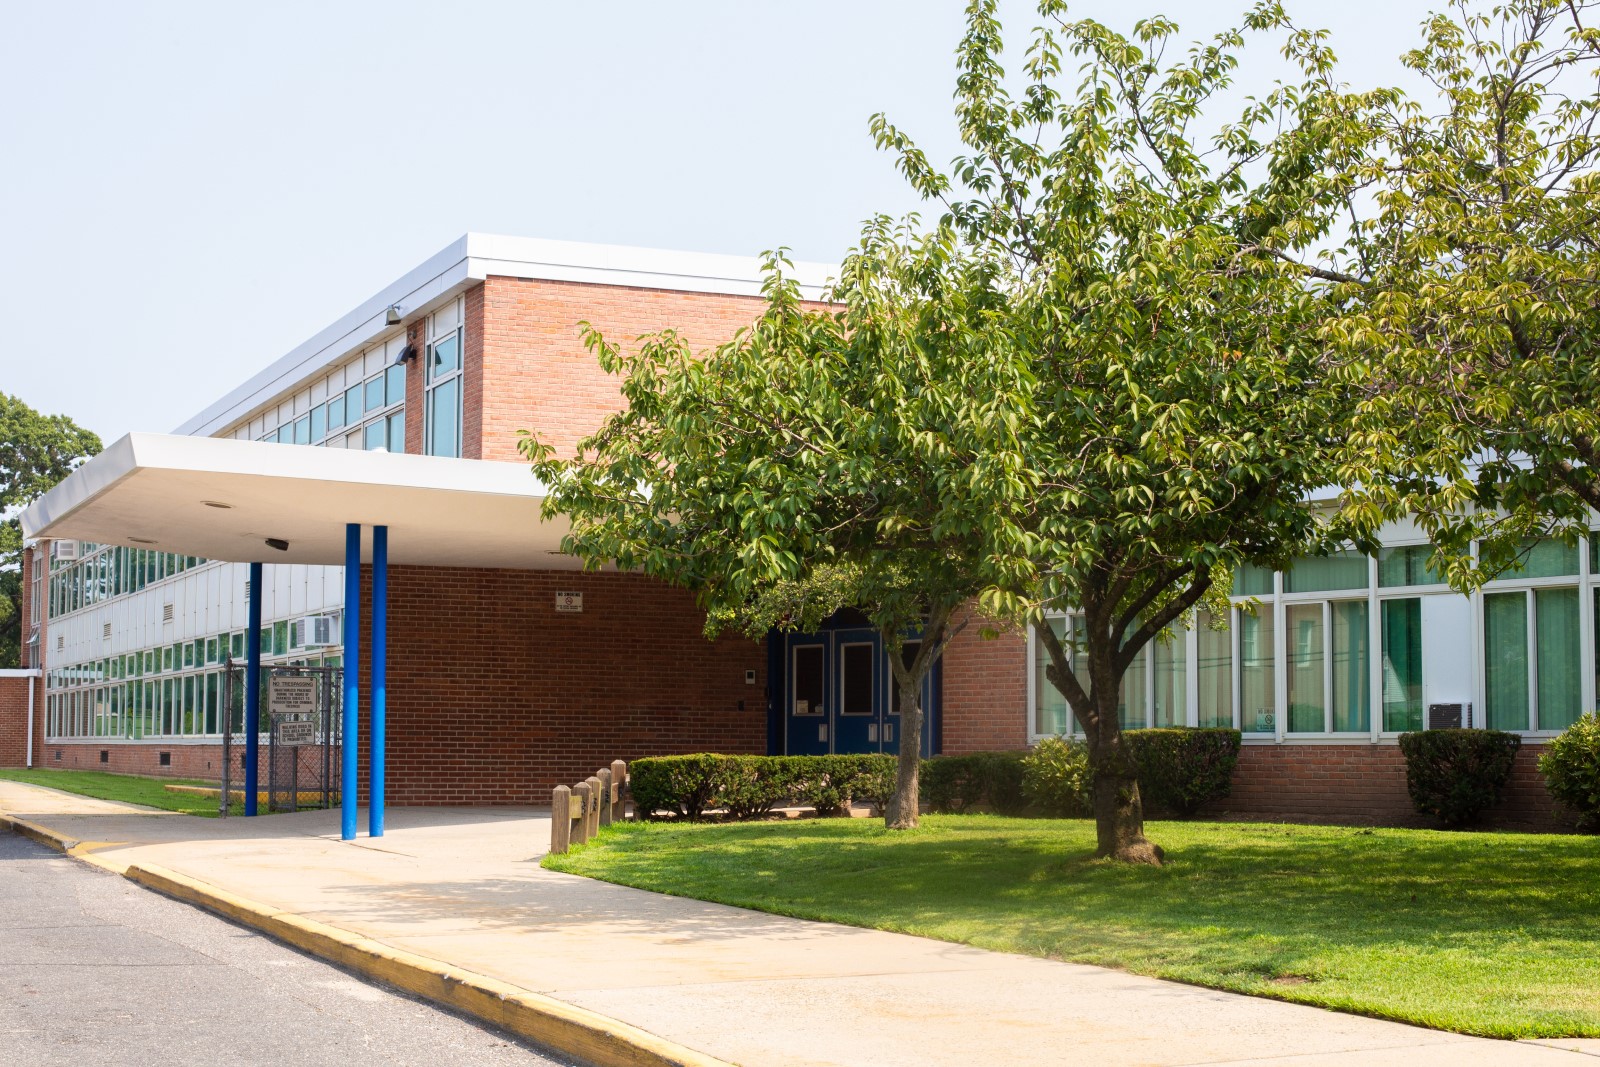 A public elementary school protected by an access control system.